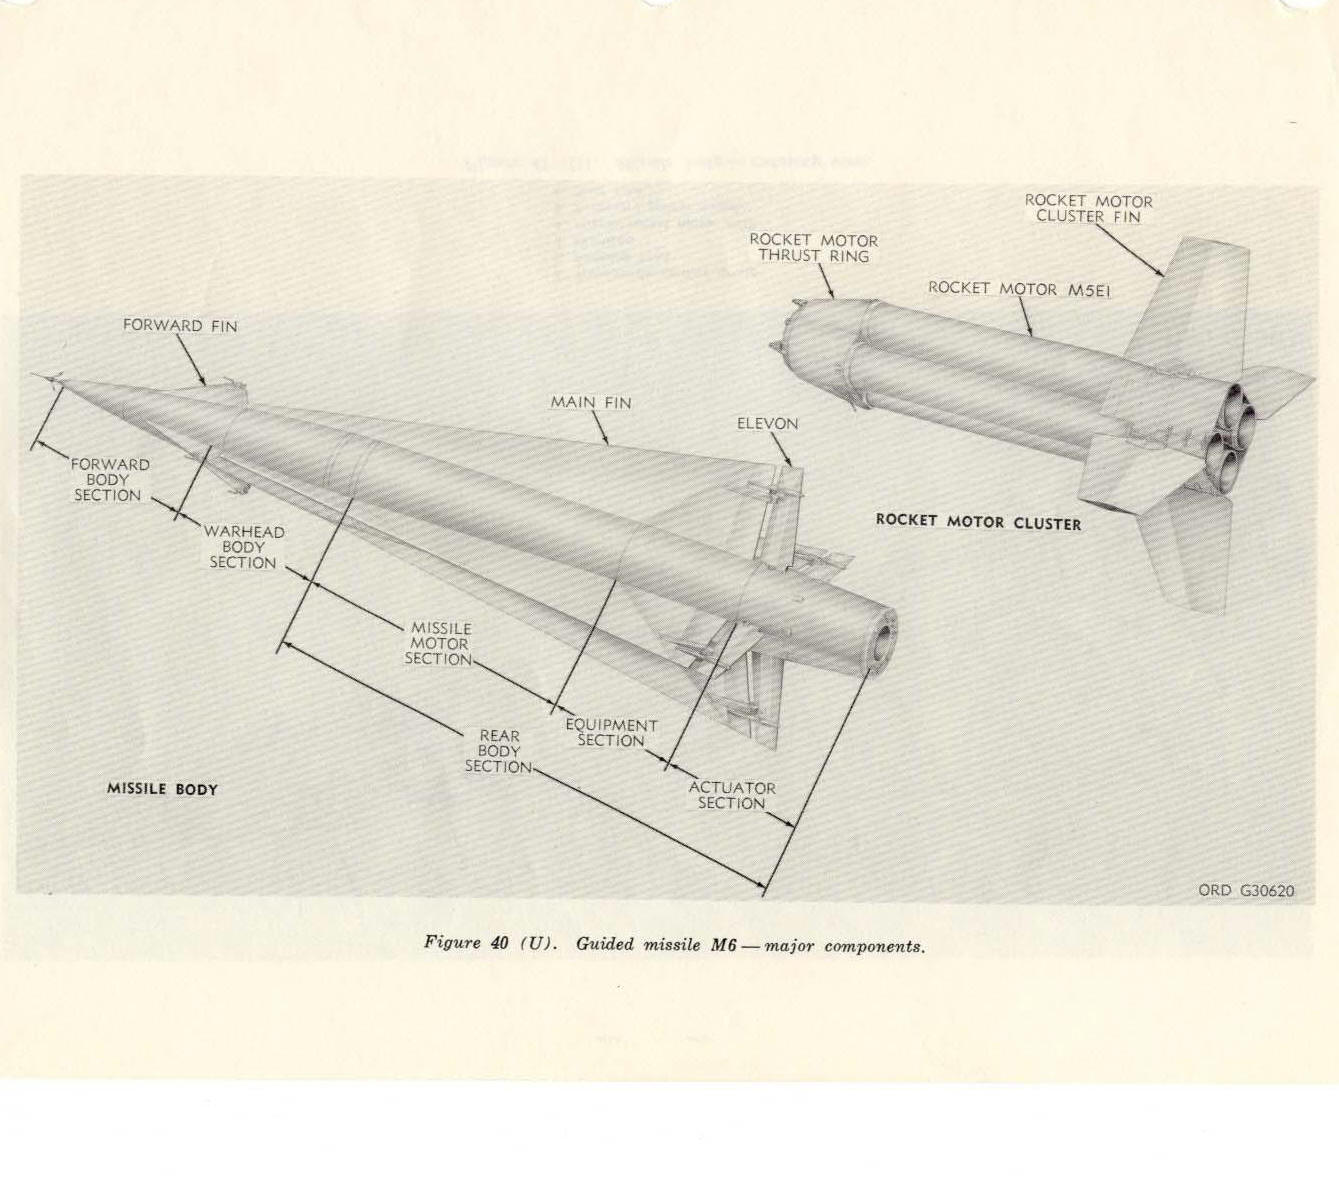 Sketch of Hercules missile with major components labeled